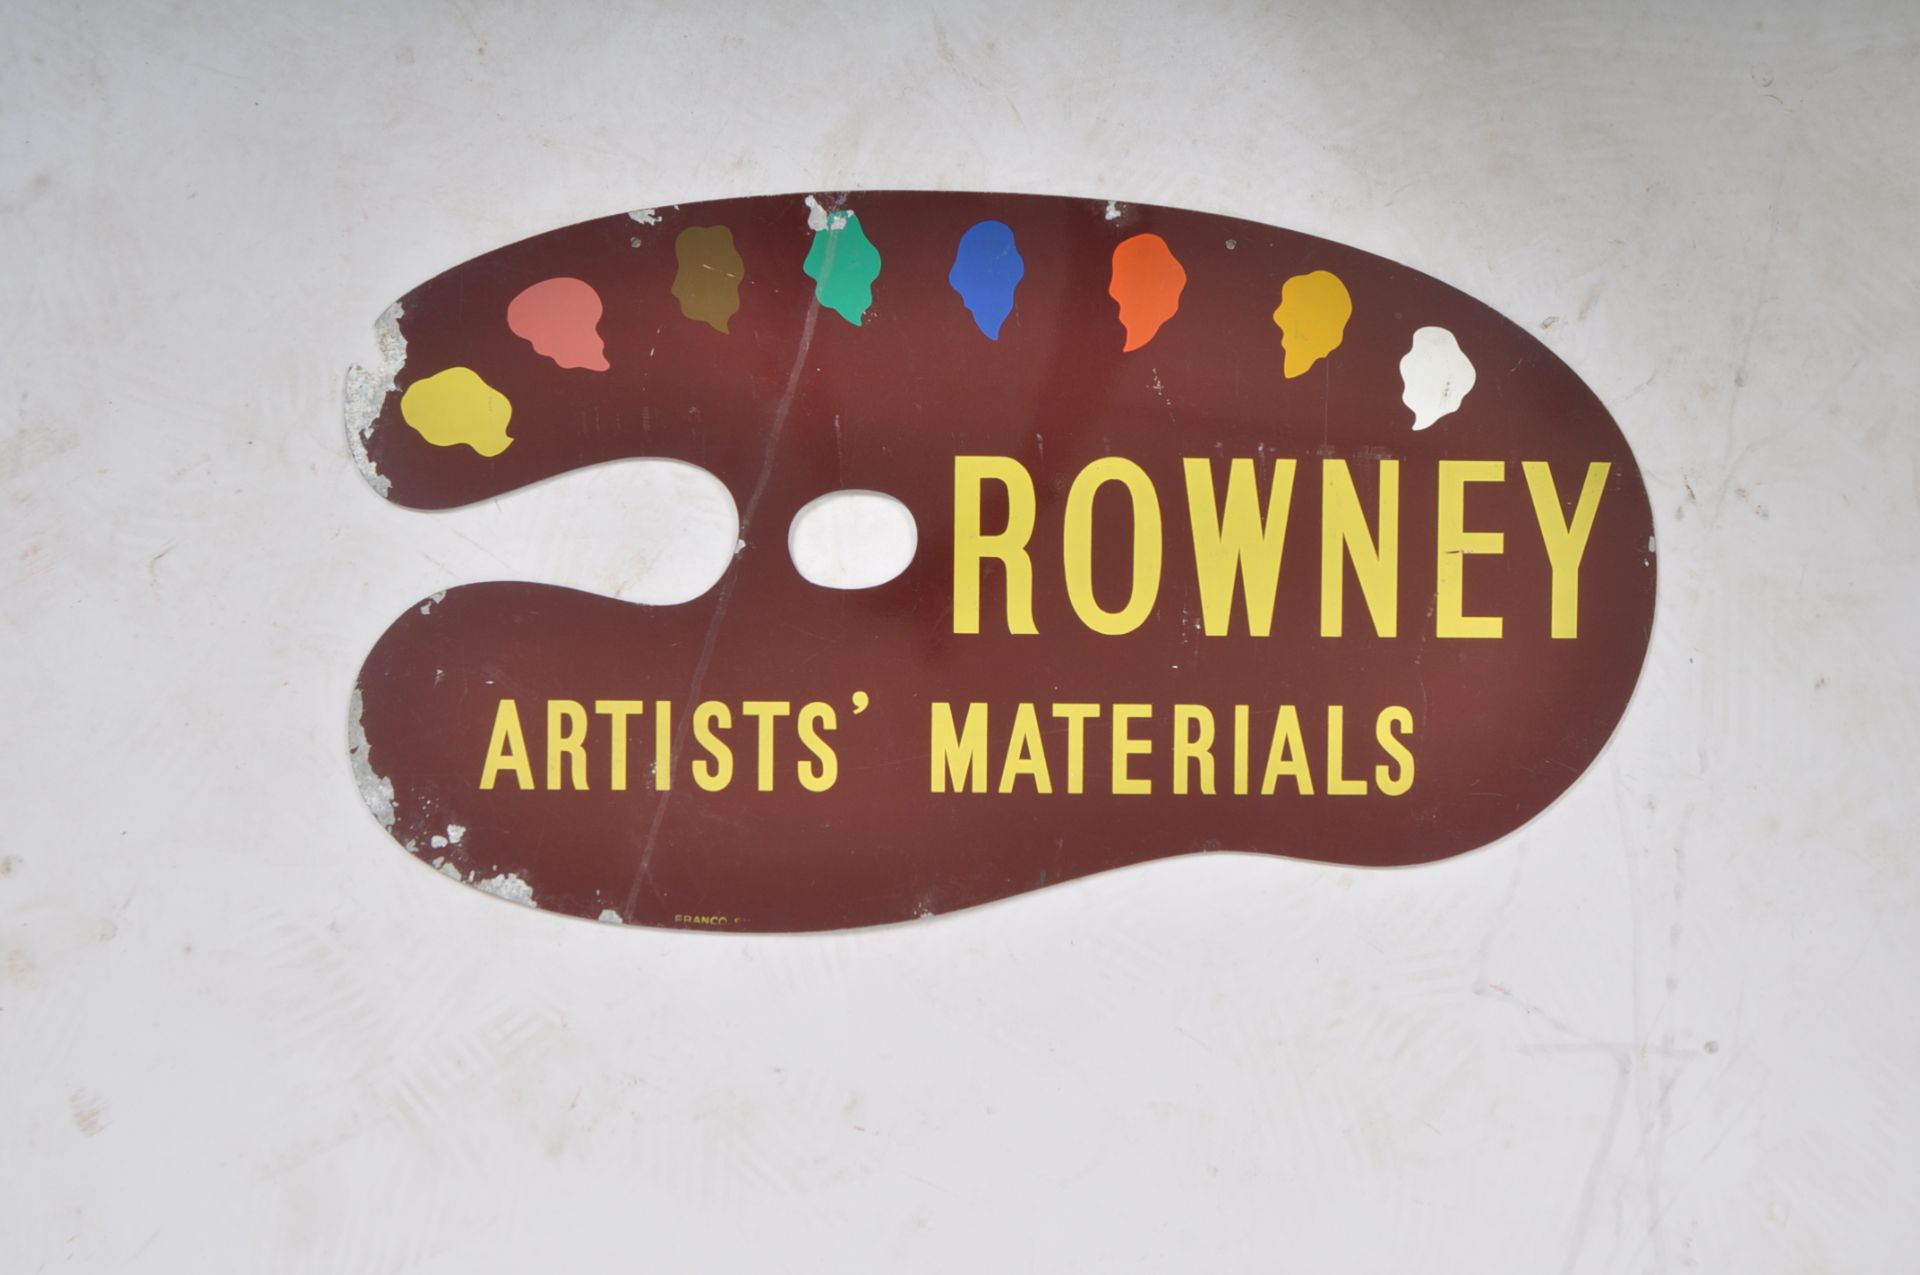 ROWNEY ARTISTS' MATERIALS - DOUBLE SIDED SHOP SIGN - Image 3 of 4